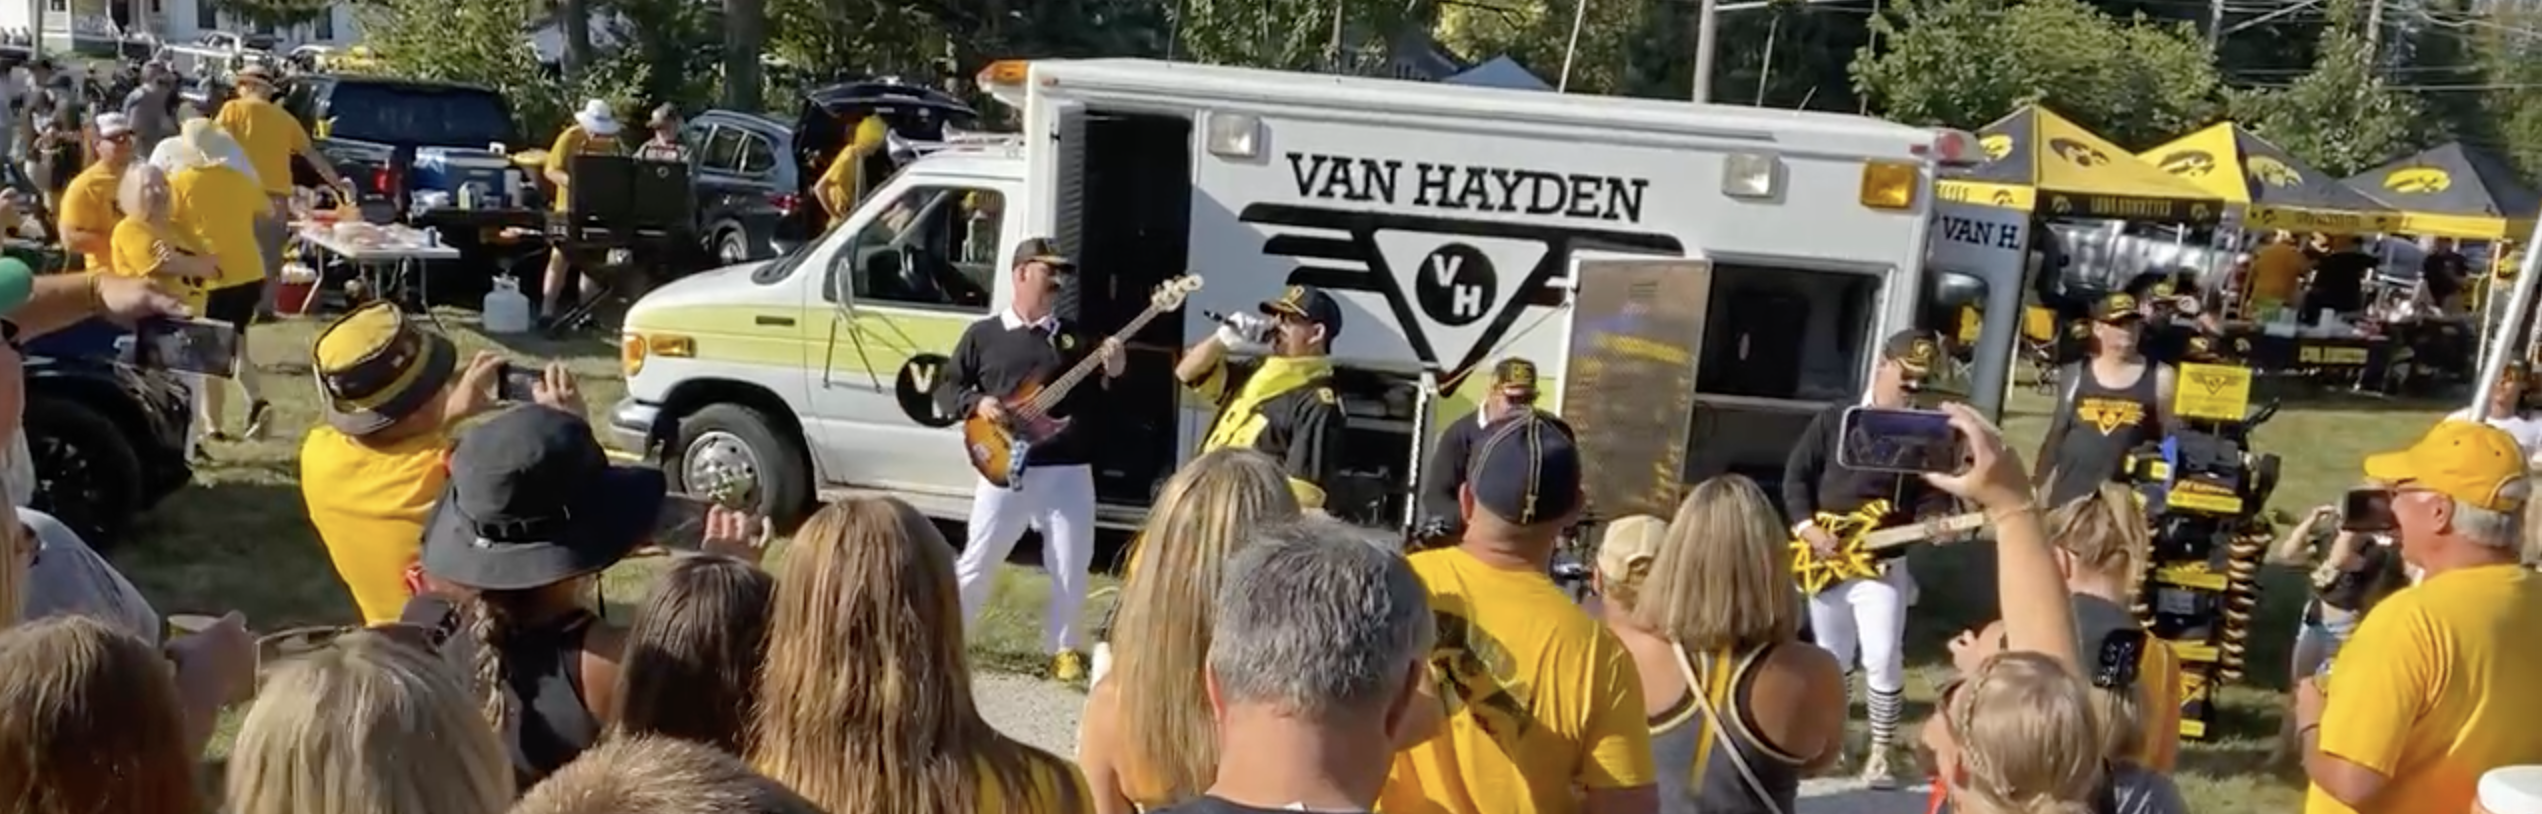 Van Hayden Band Performing in front of a large crowd with their Vanbulance